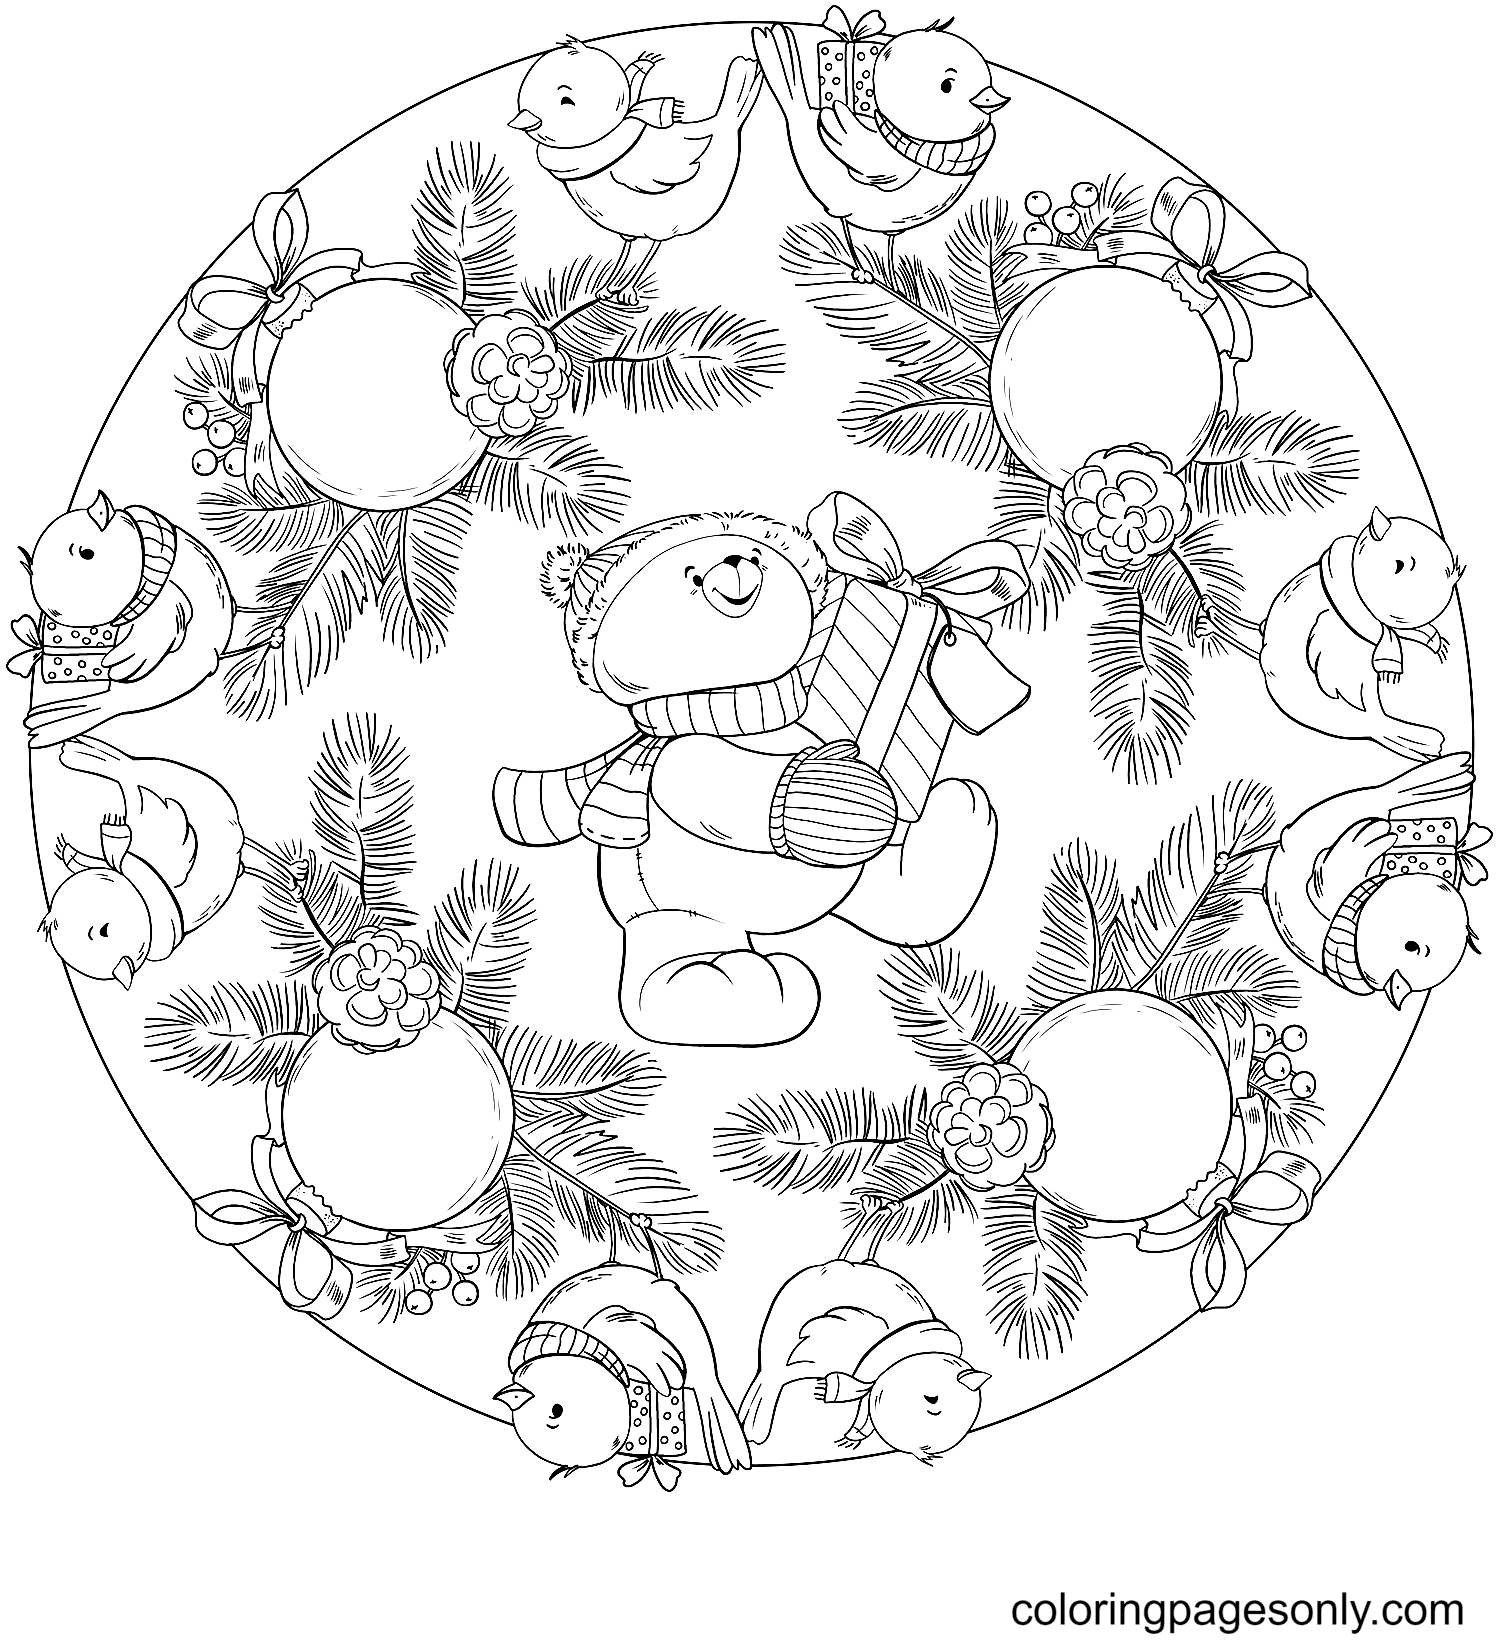 Mandala Christmas Ornament, Birds and Teddy Bear Coloring Pages